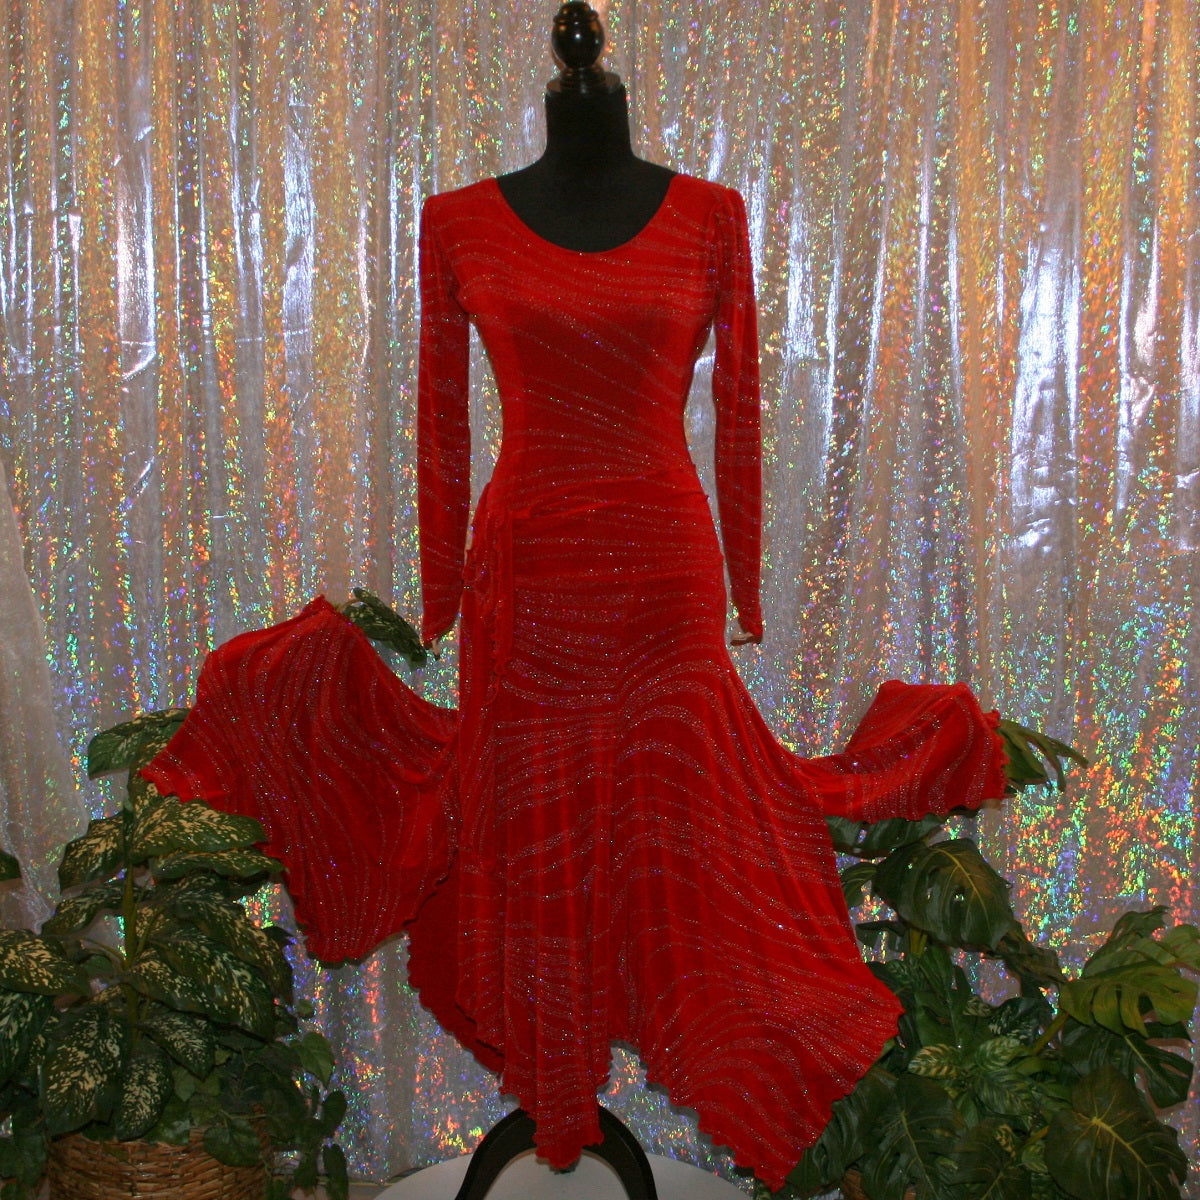 Red 3 piece ballroom converta dress consisting of a long sleeve red bodysuit, Latin-rhythm skirt with hand beading, smooth waltz length skirt plus neck piece with hand beading created out of  deep red glitter slinky with a gorgeous wave pattern shown with smooth skirt & minus the neck piece